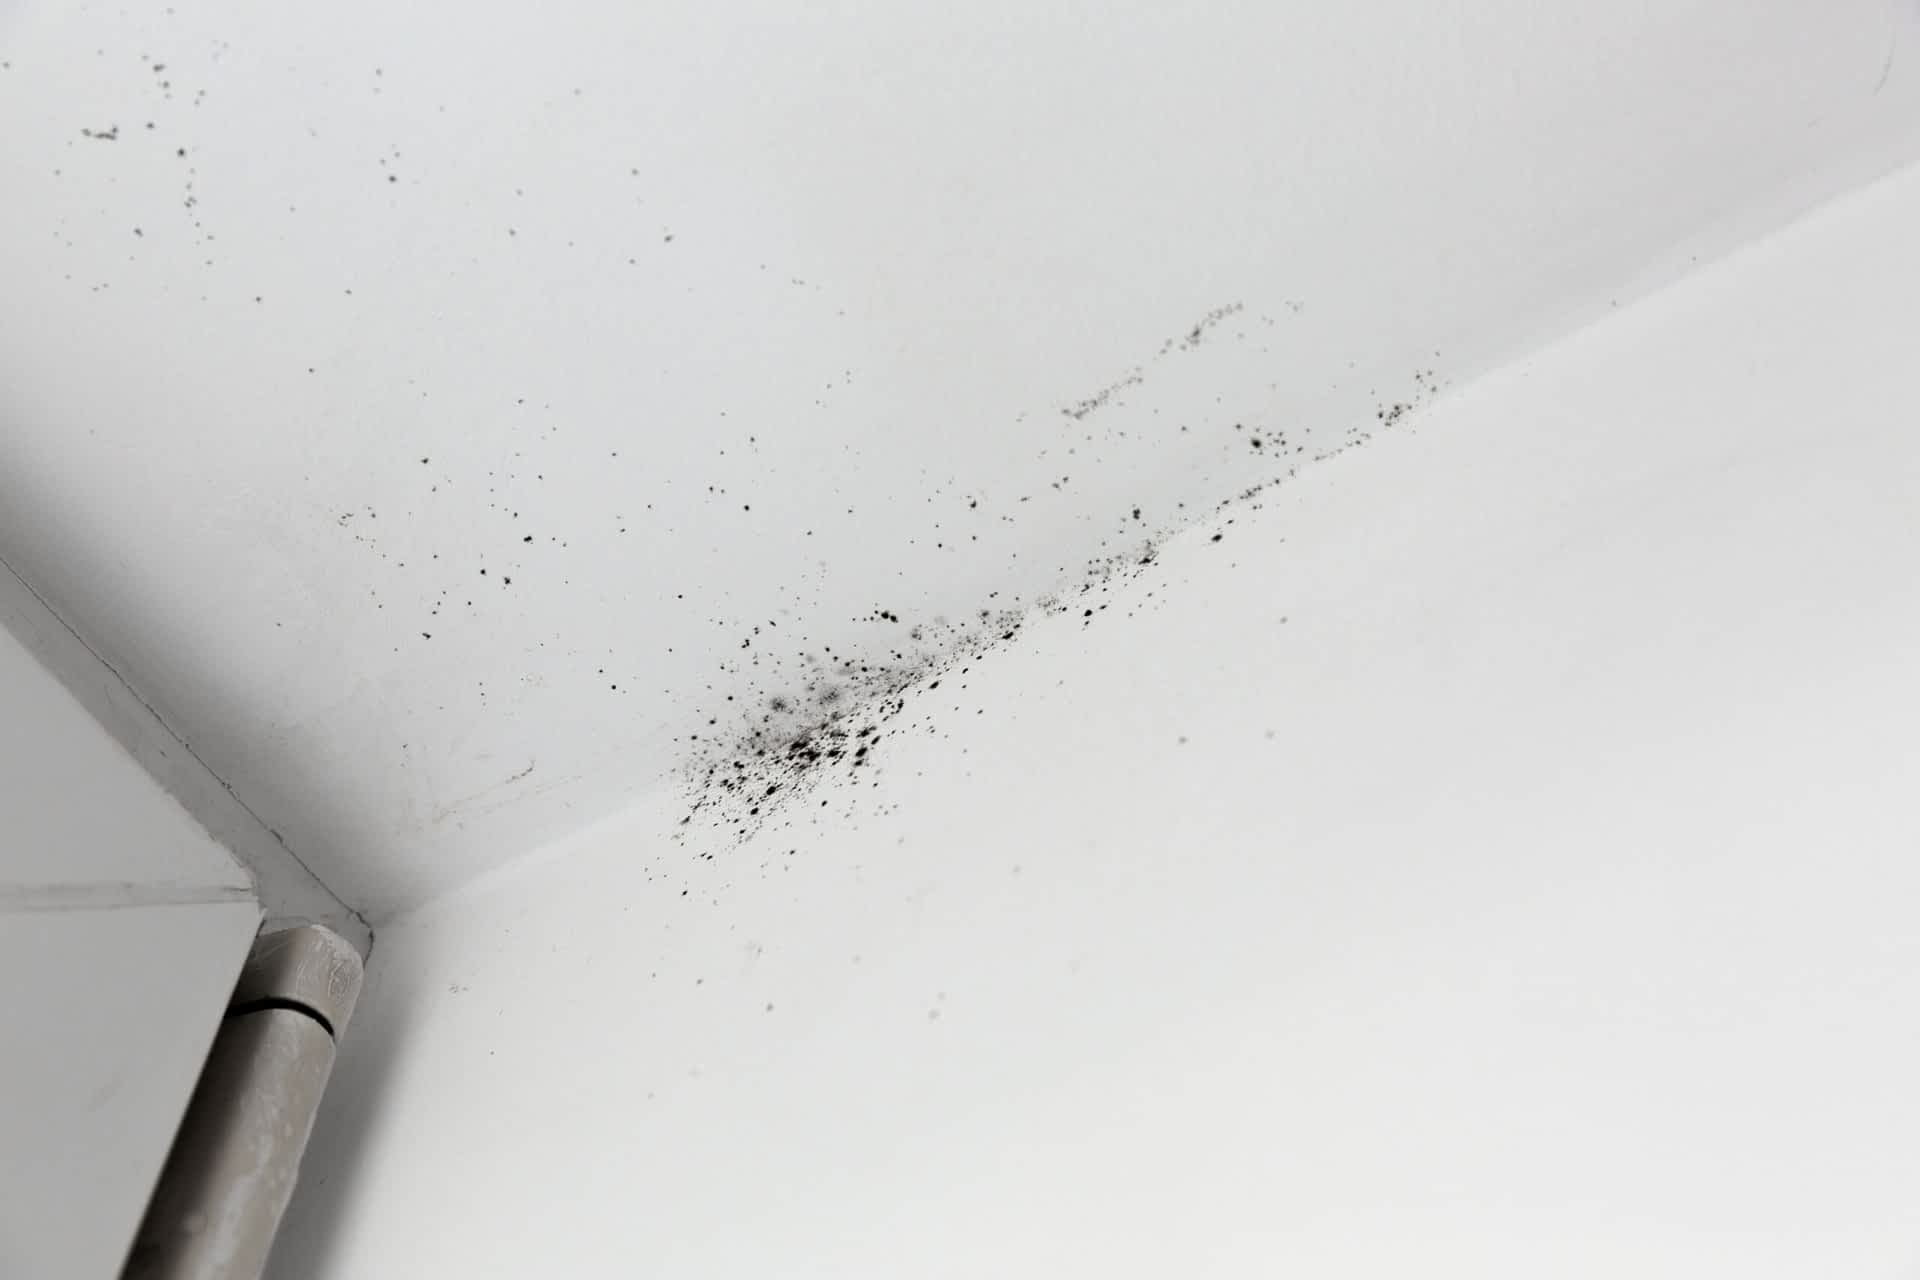 Mold Remediation Contractor New York - A Moldy Ceiling Starting to Show Mold